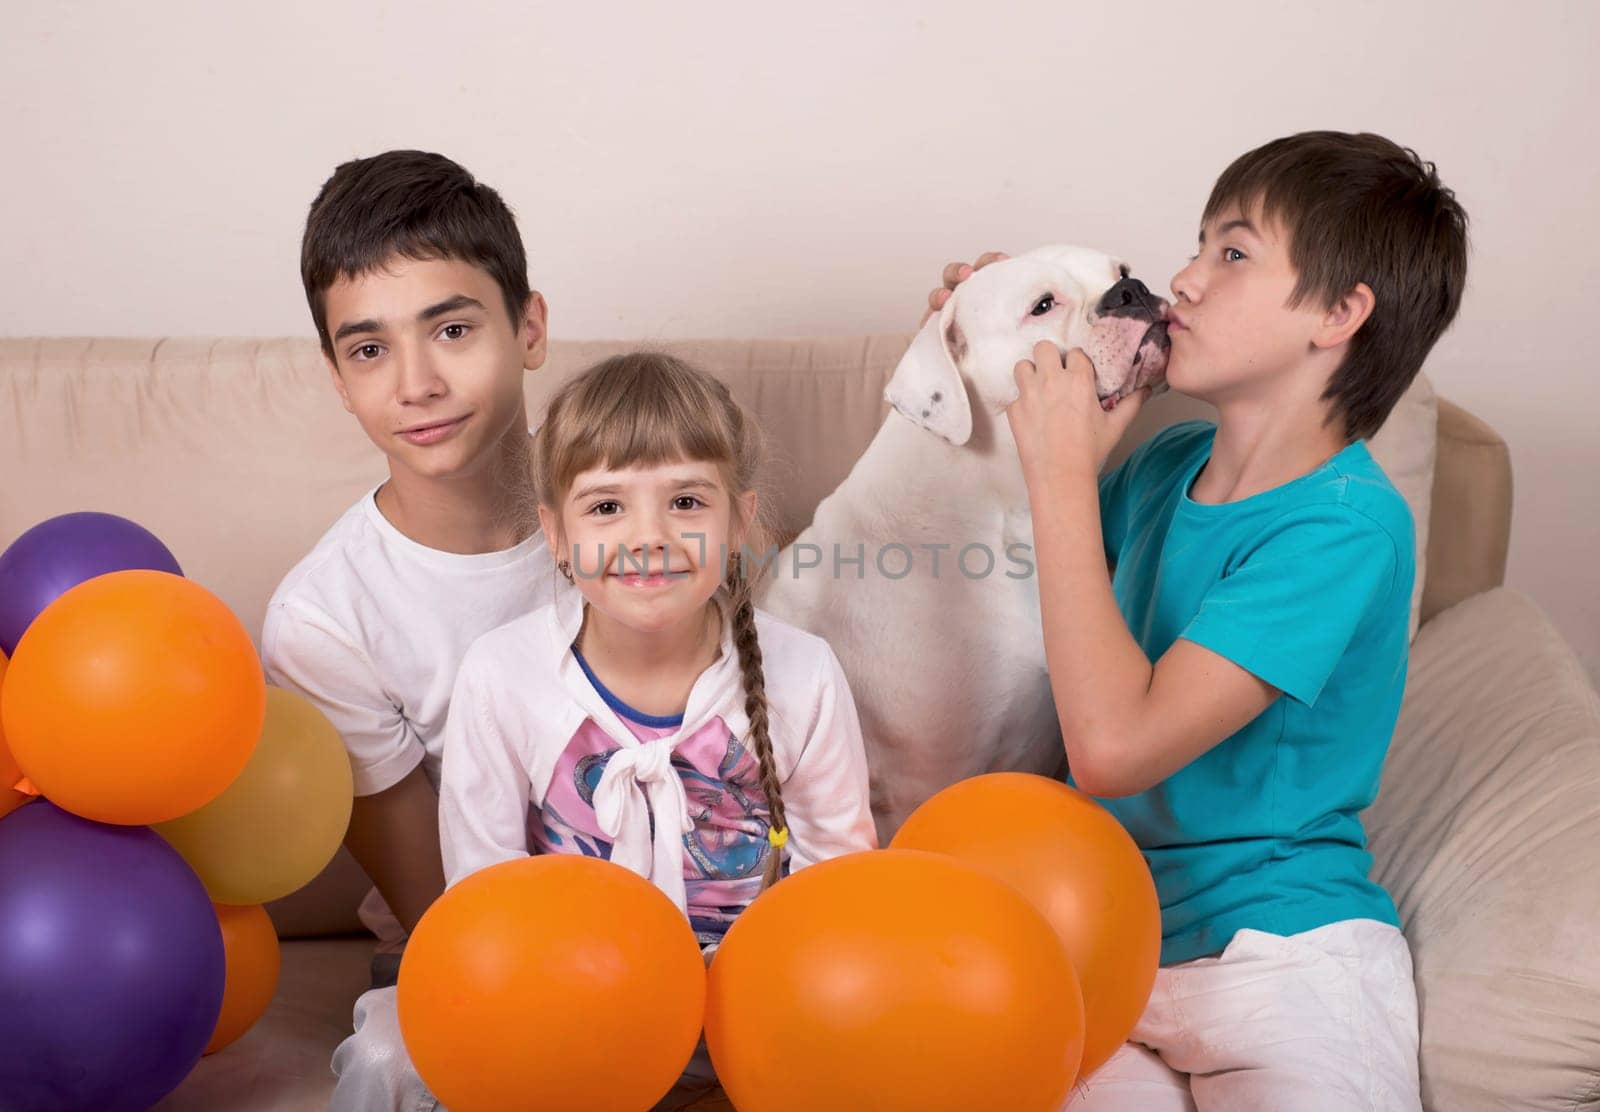 People and animals. Happy, cheerful children and an American bulldog dog sit on a bright sofa in the living room by aprilphoto